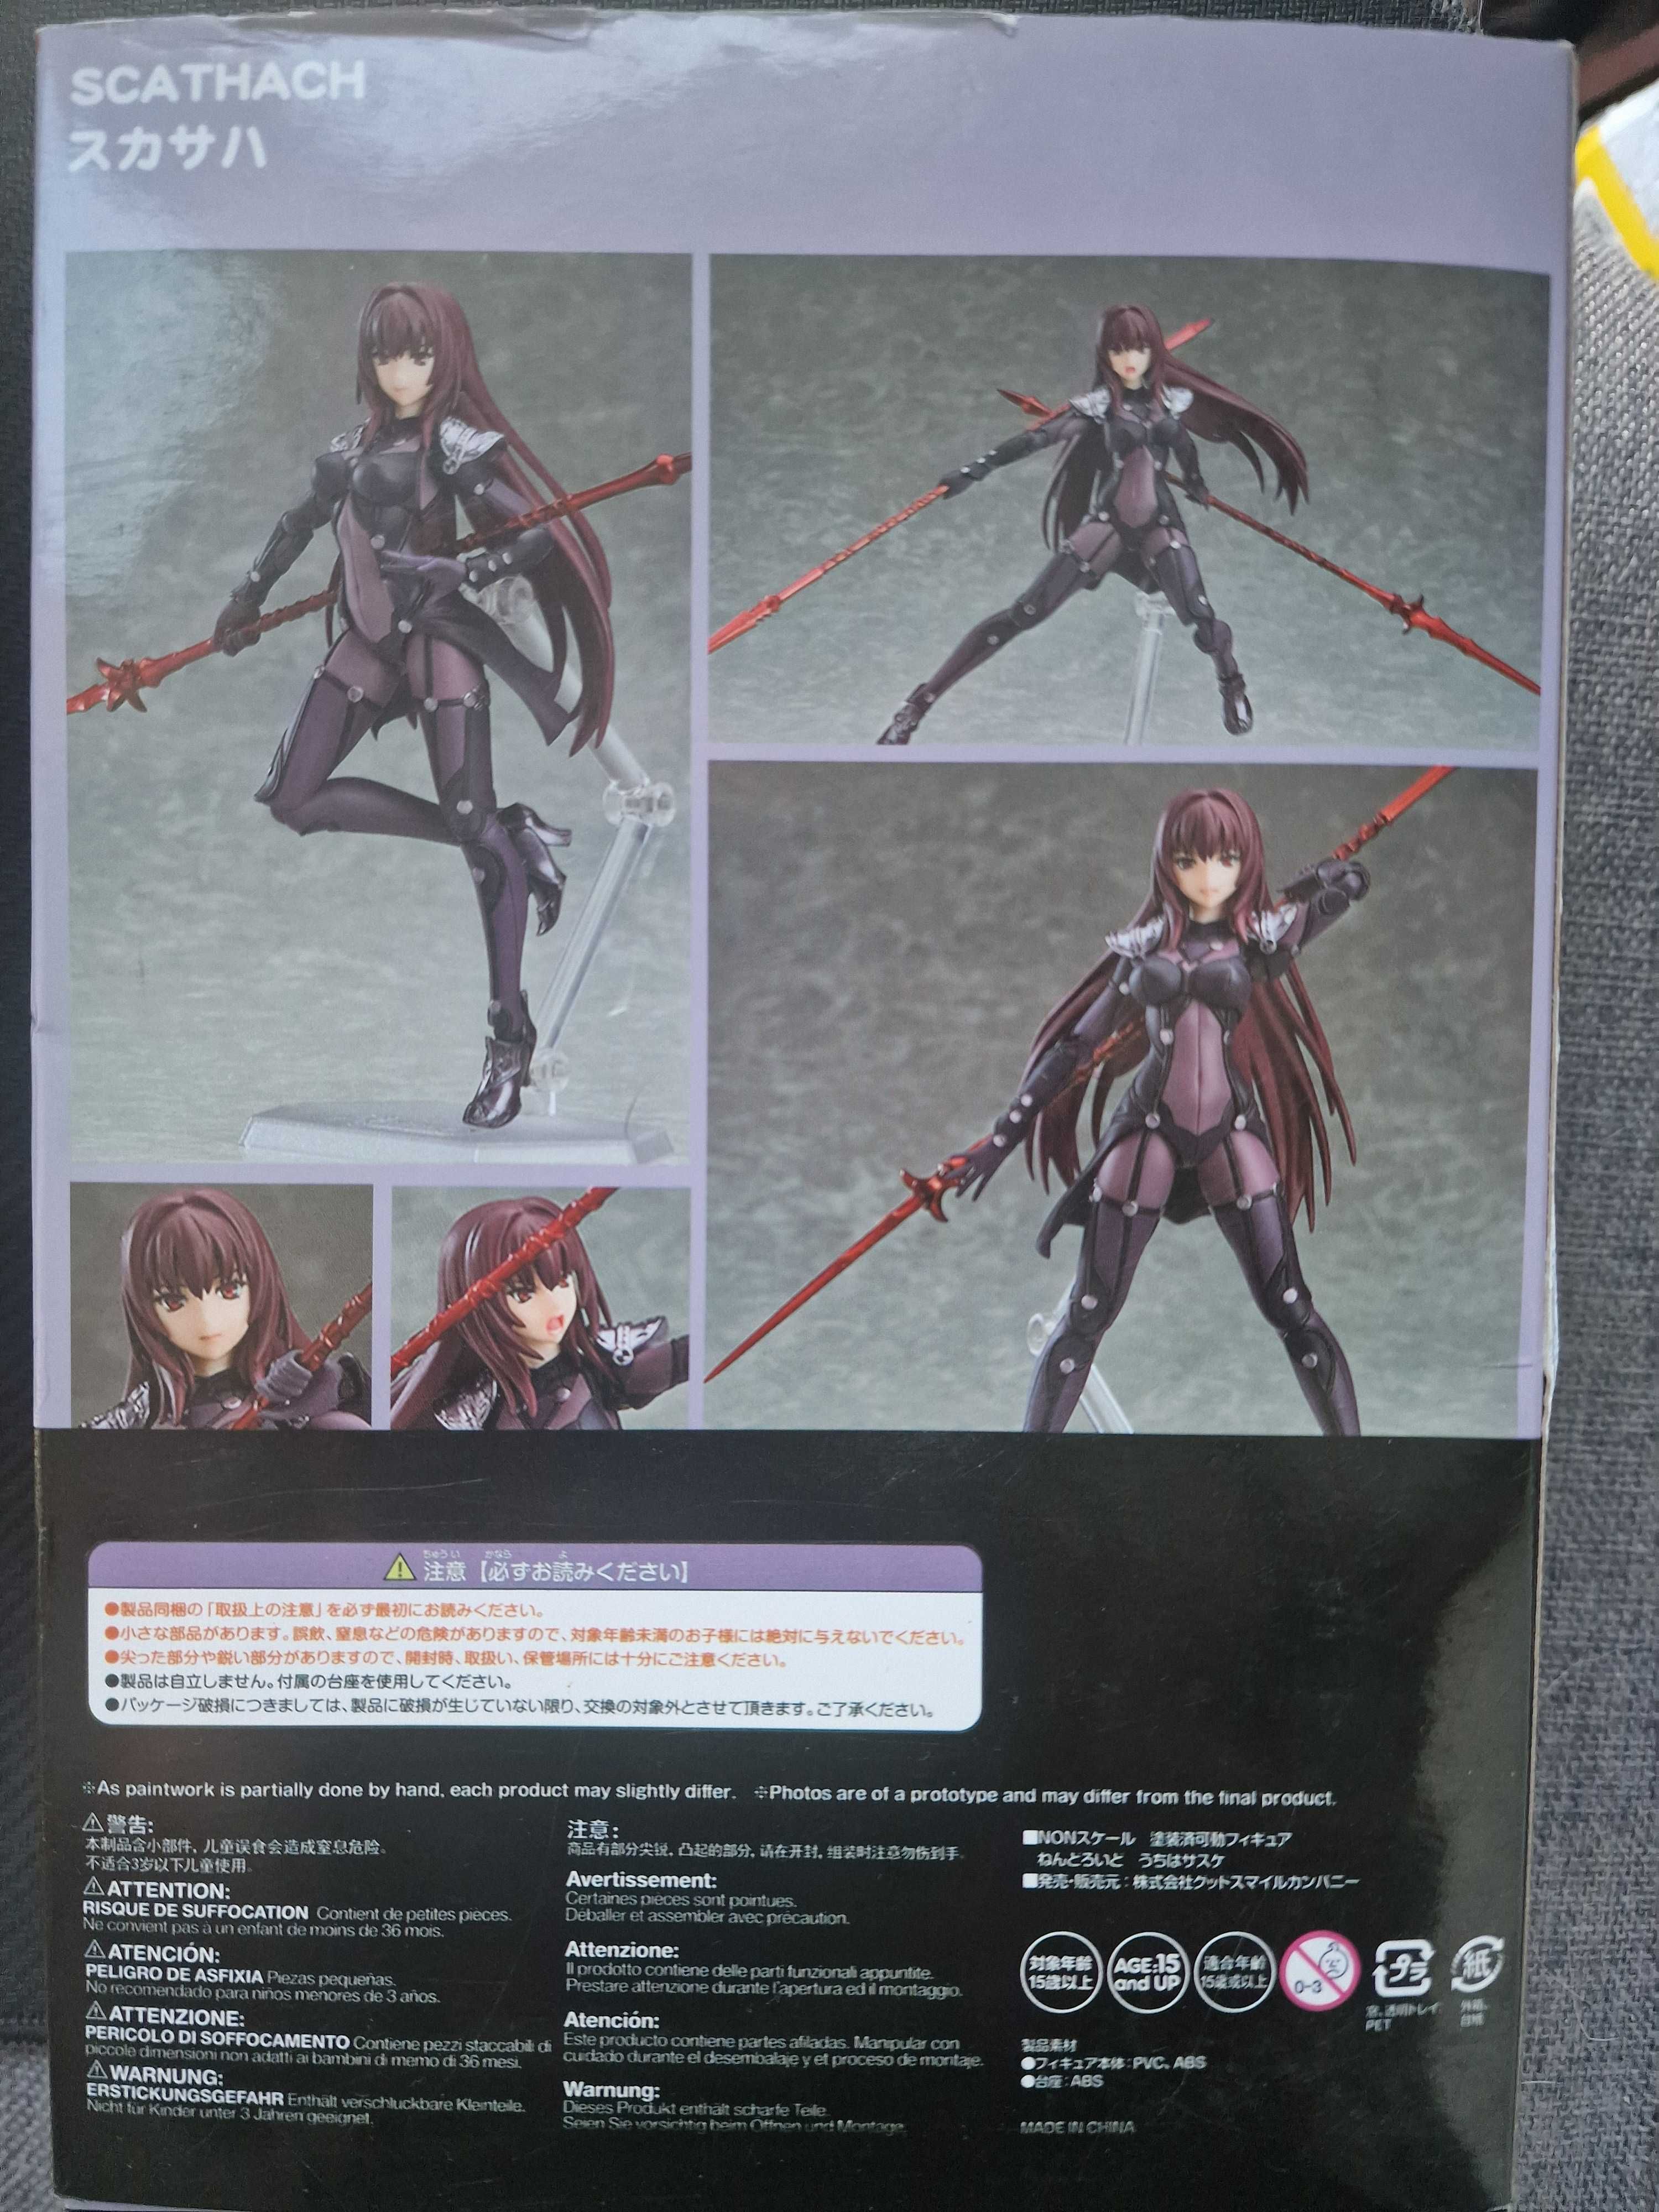 NEW Аниме фигурка на "Lancer Scathach" oт анимето " Fate Grand Order"